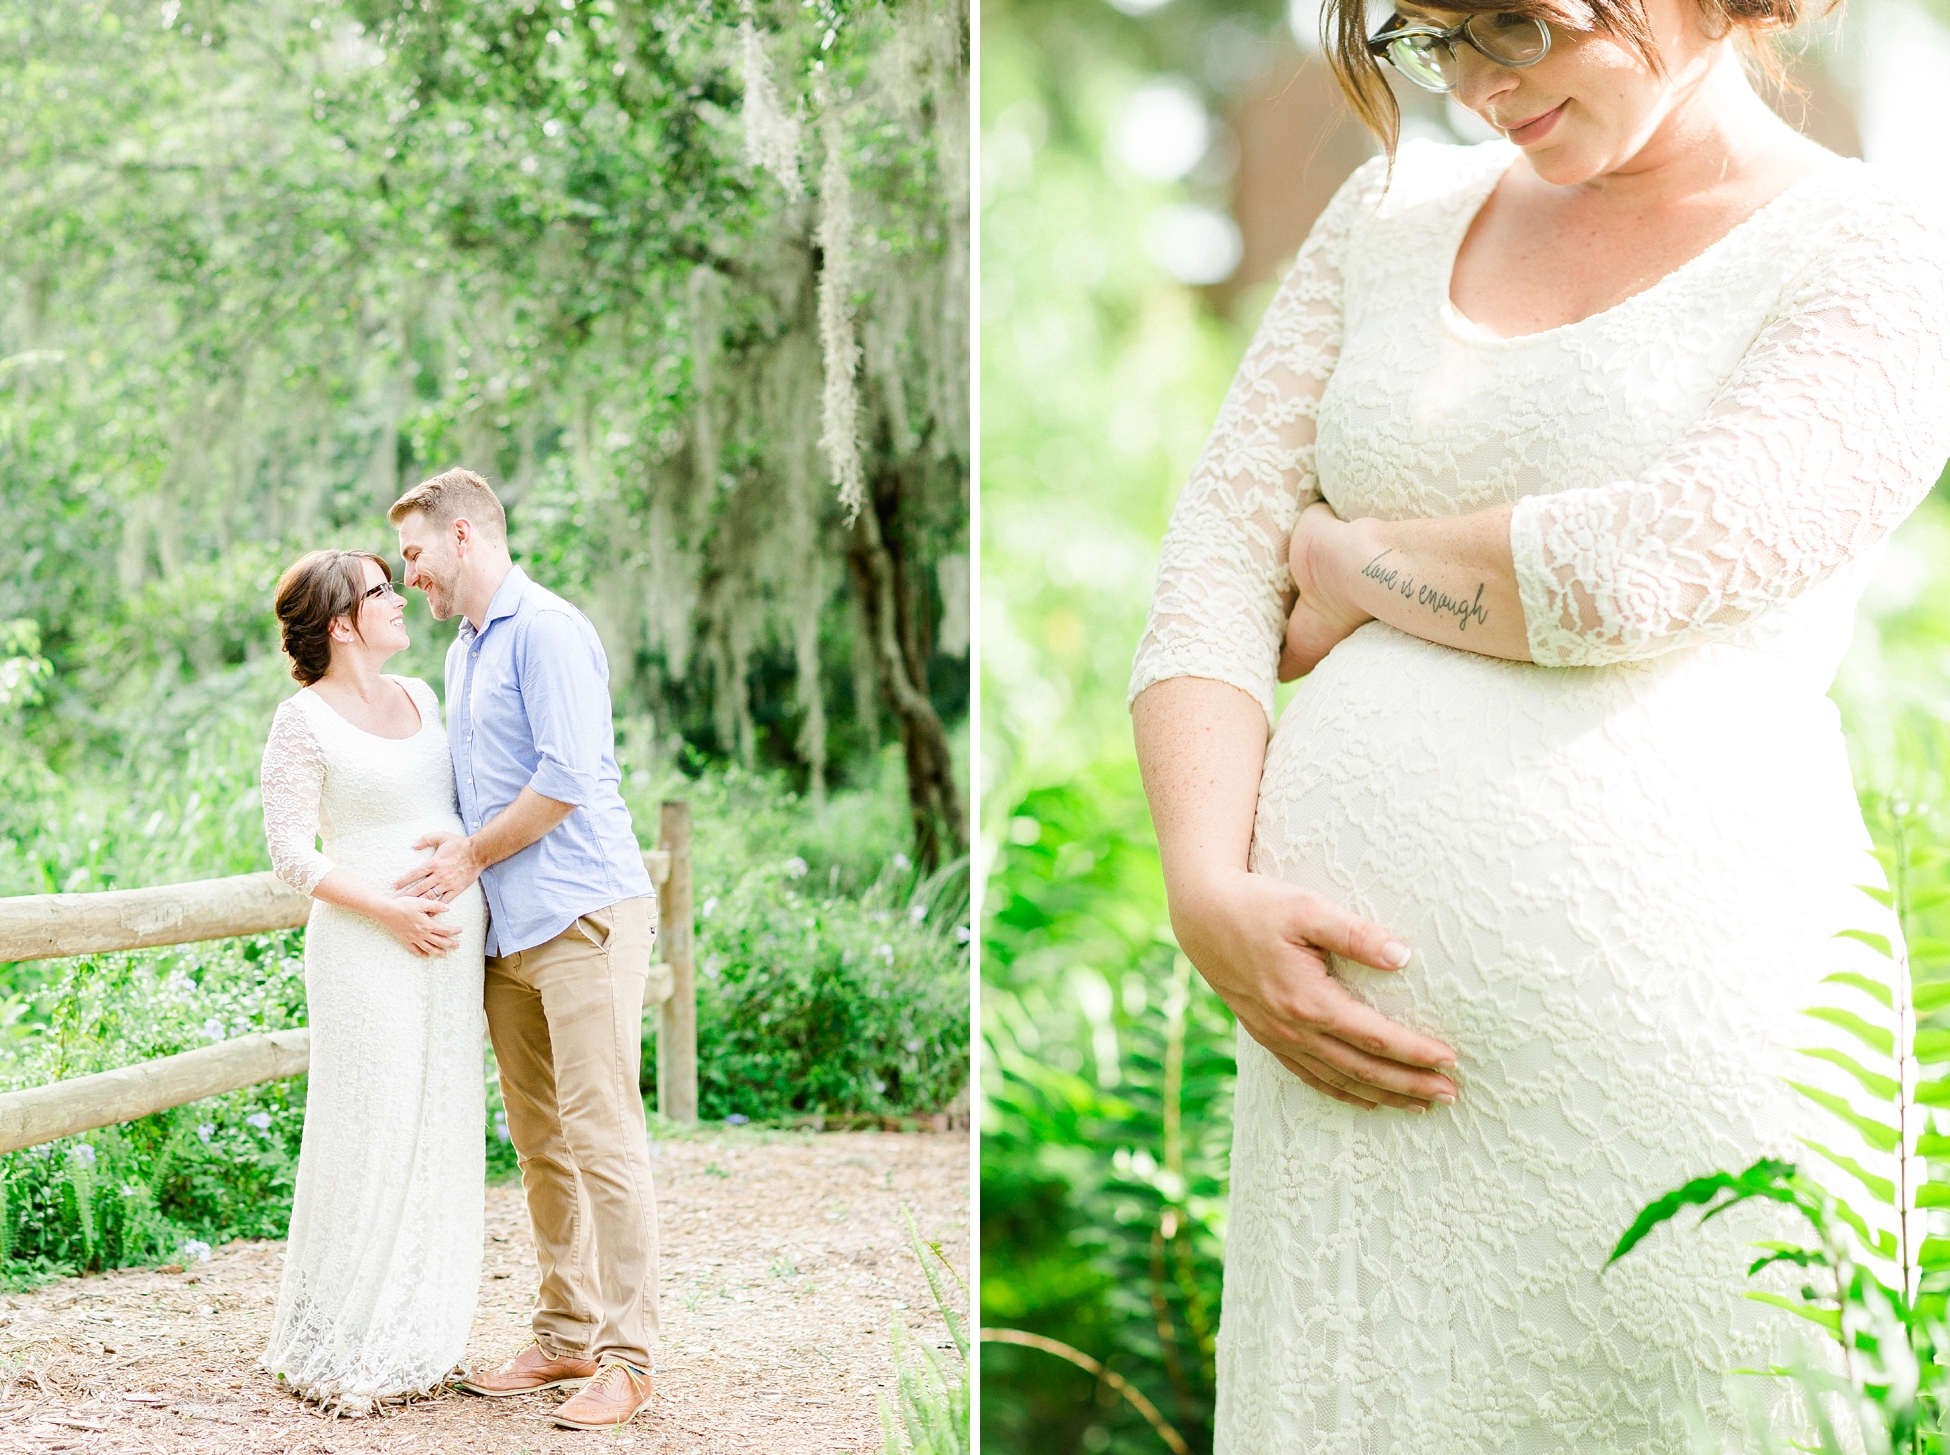 Tampa Maternity Photographer | © Ailyn La Torre Photography 2018